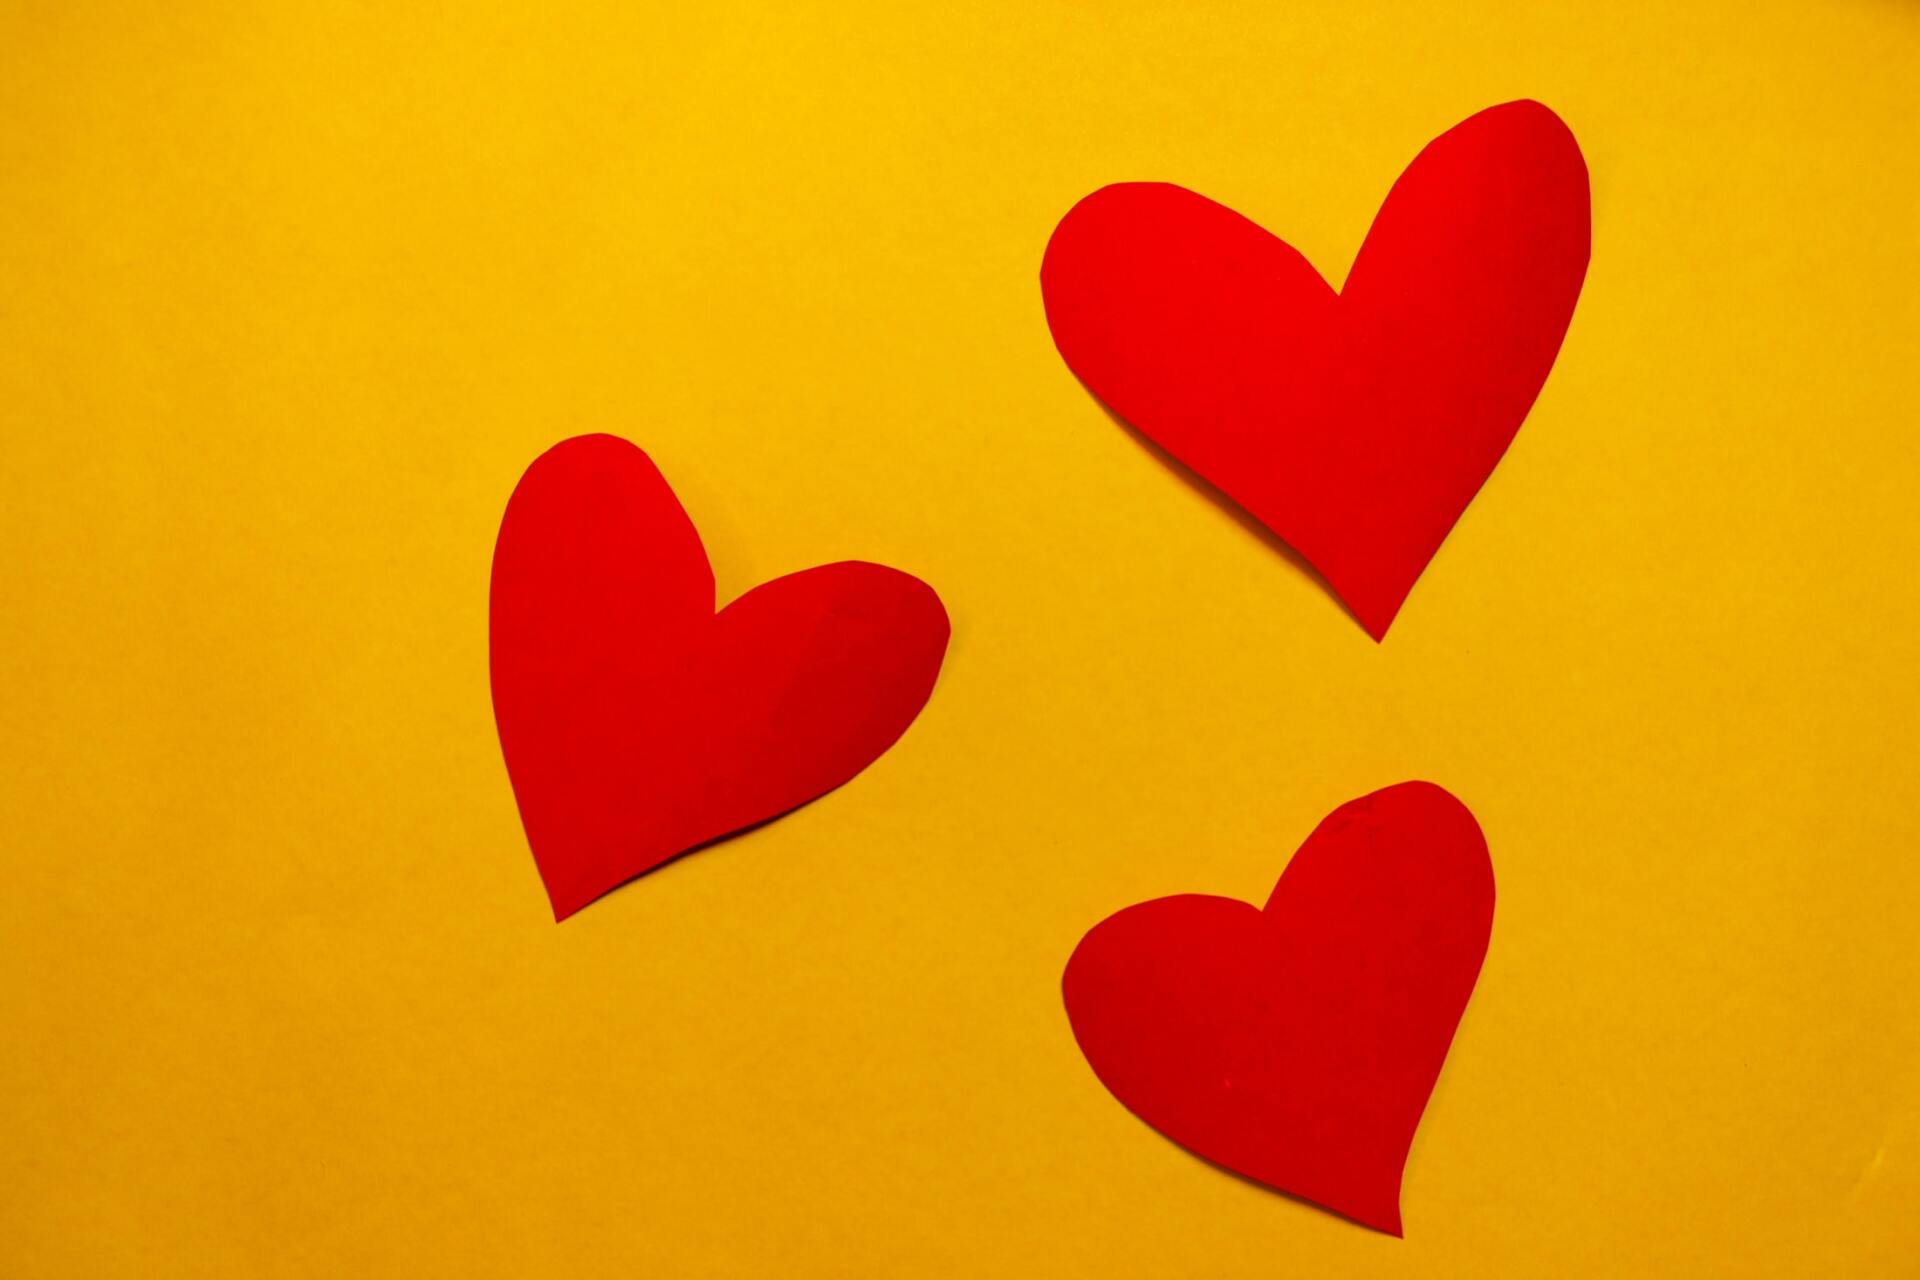 three red hearts remind us how we need to love our life